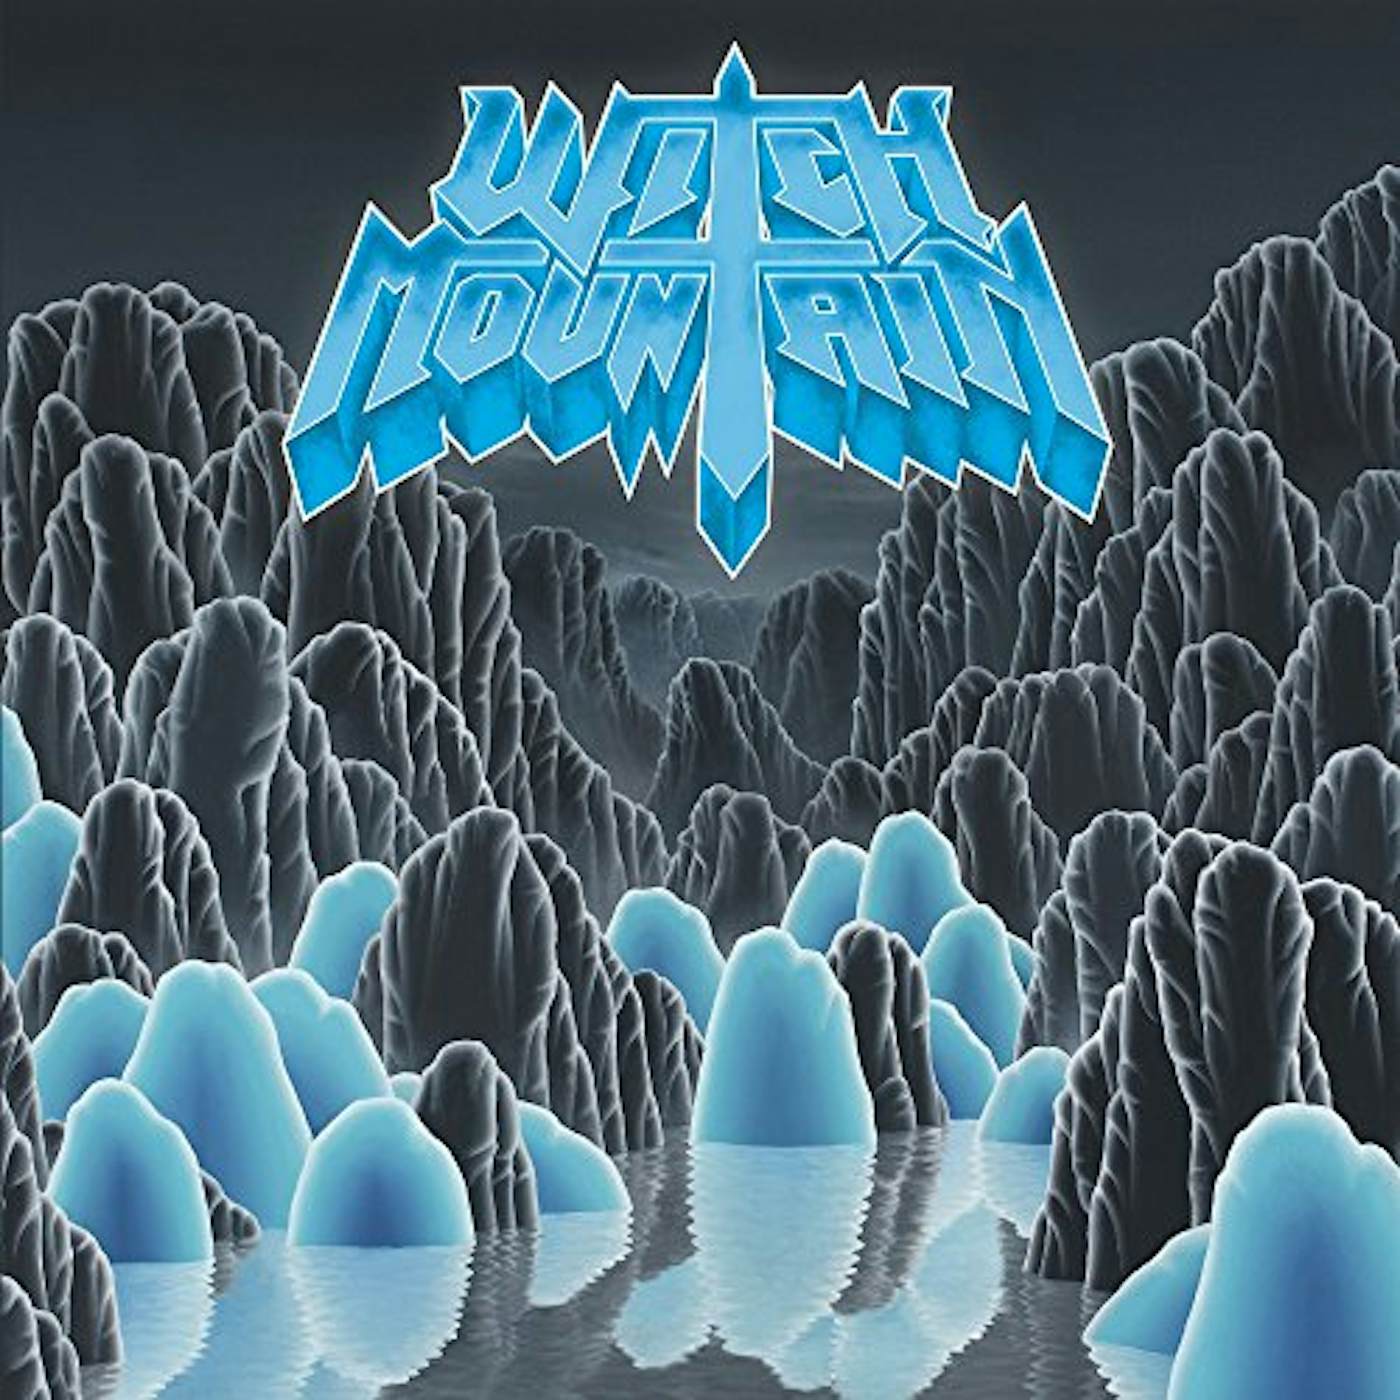 WITCH MOUNTAIN CD